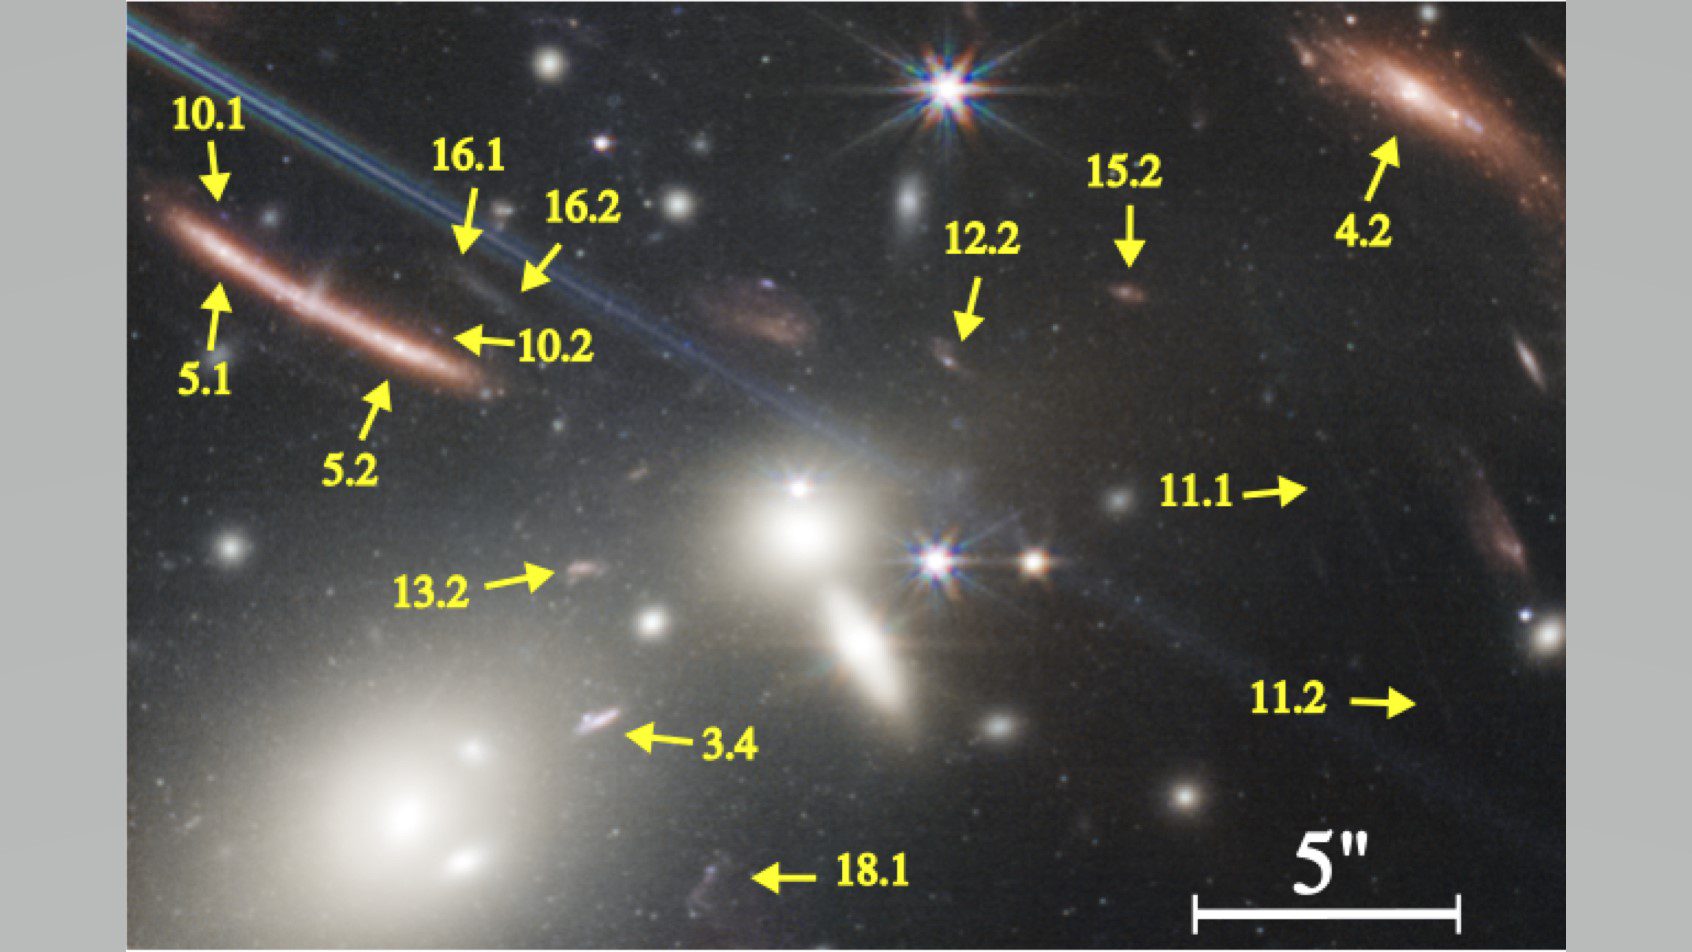 Arrows indicate magnified galaxies